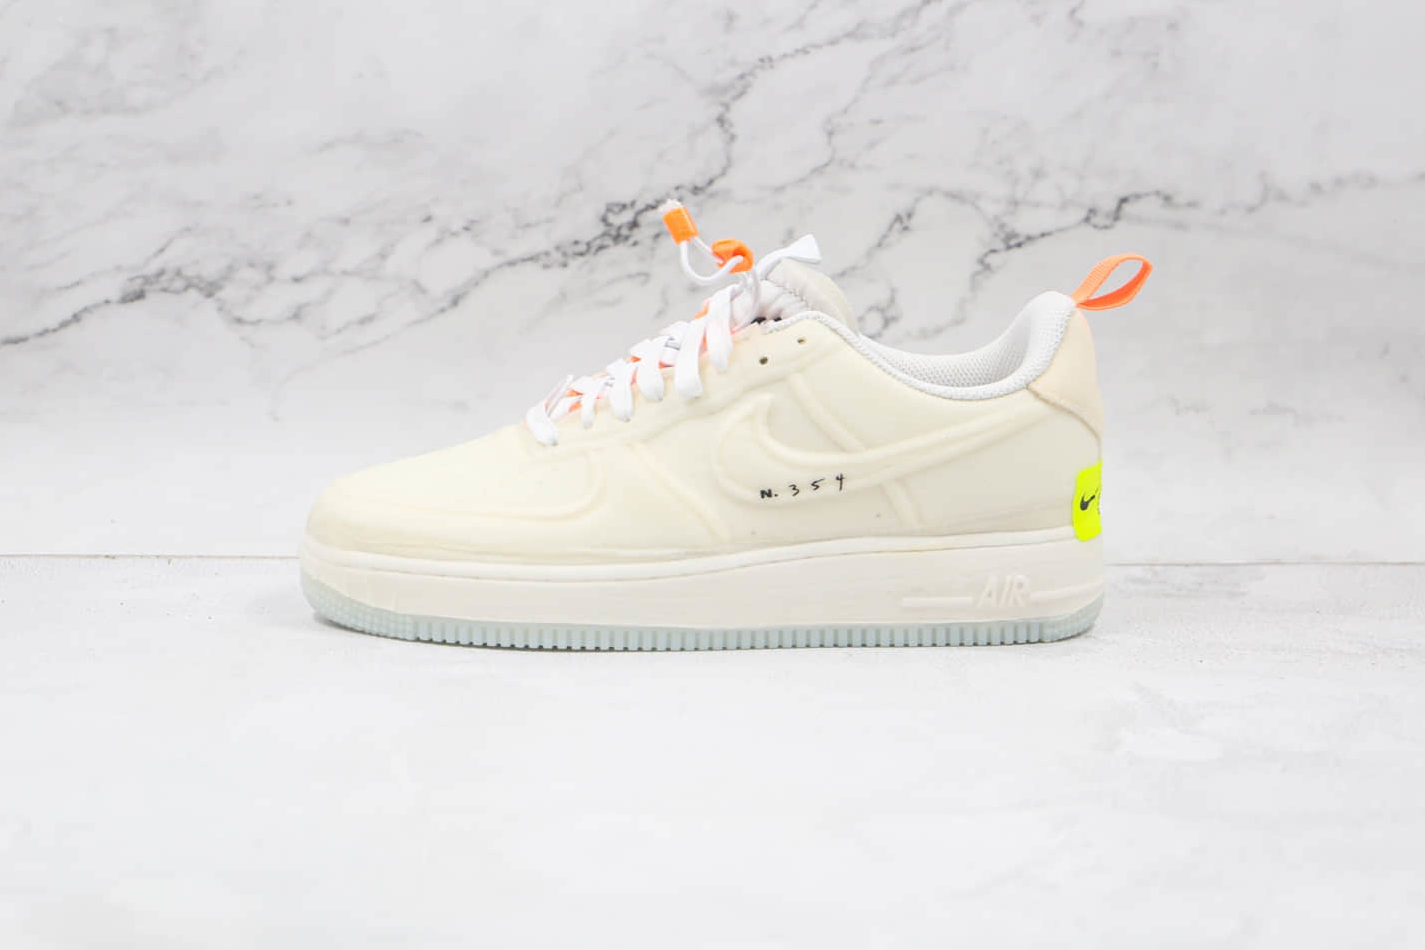 Nike Air Force 1 Low Experimental 'Sail' - CV1754-100: Shop the Latest Release